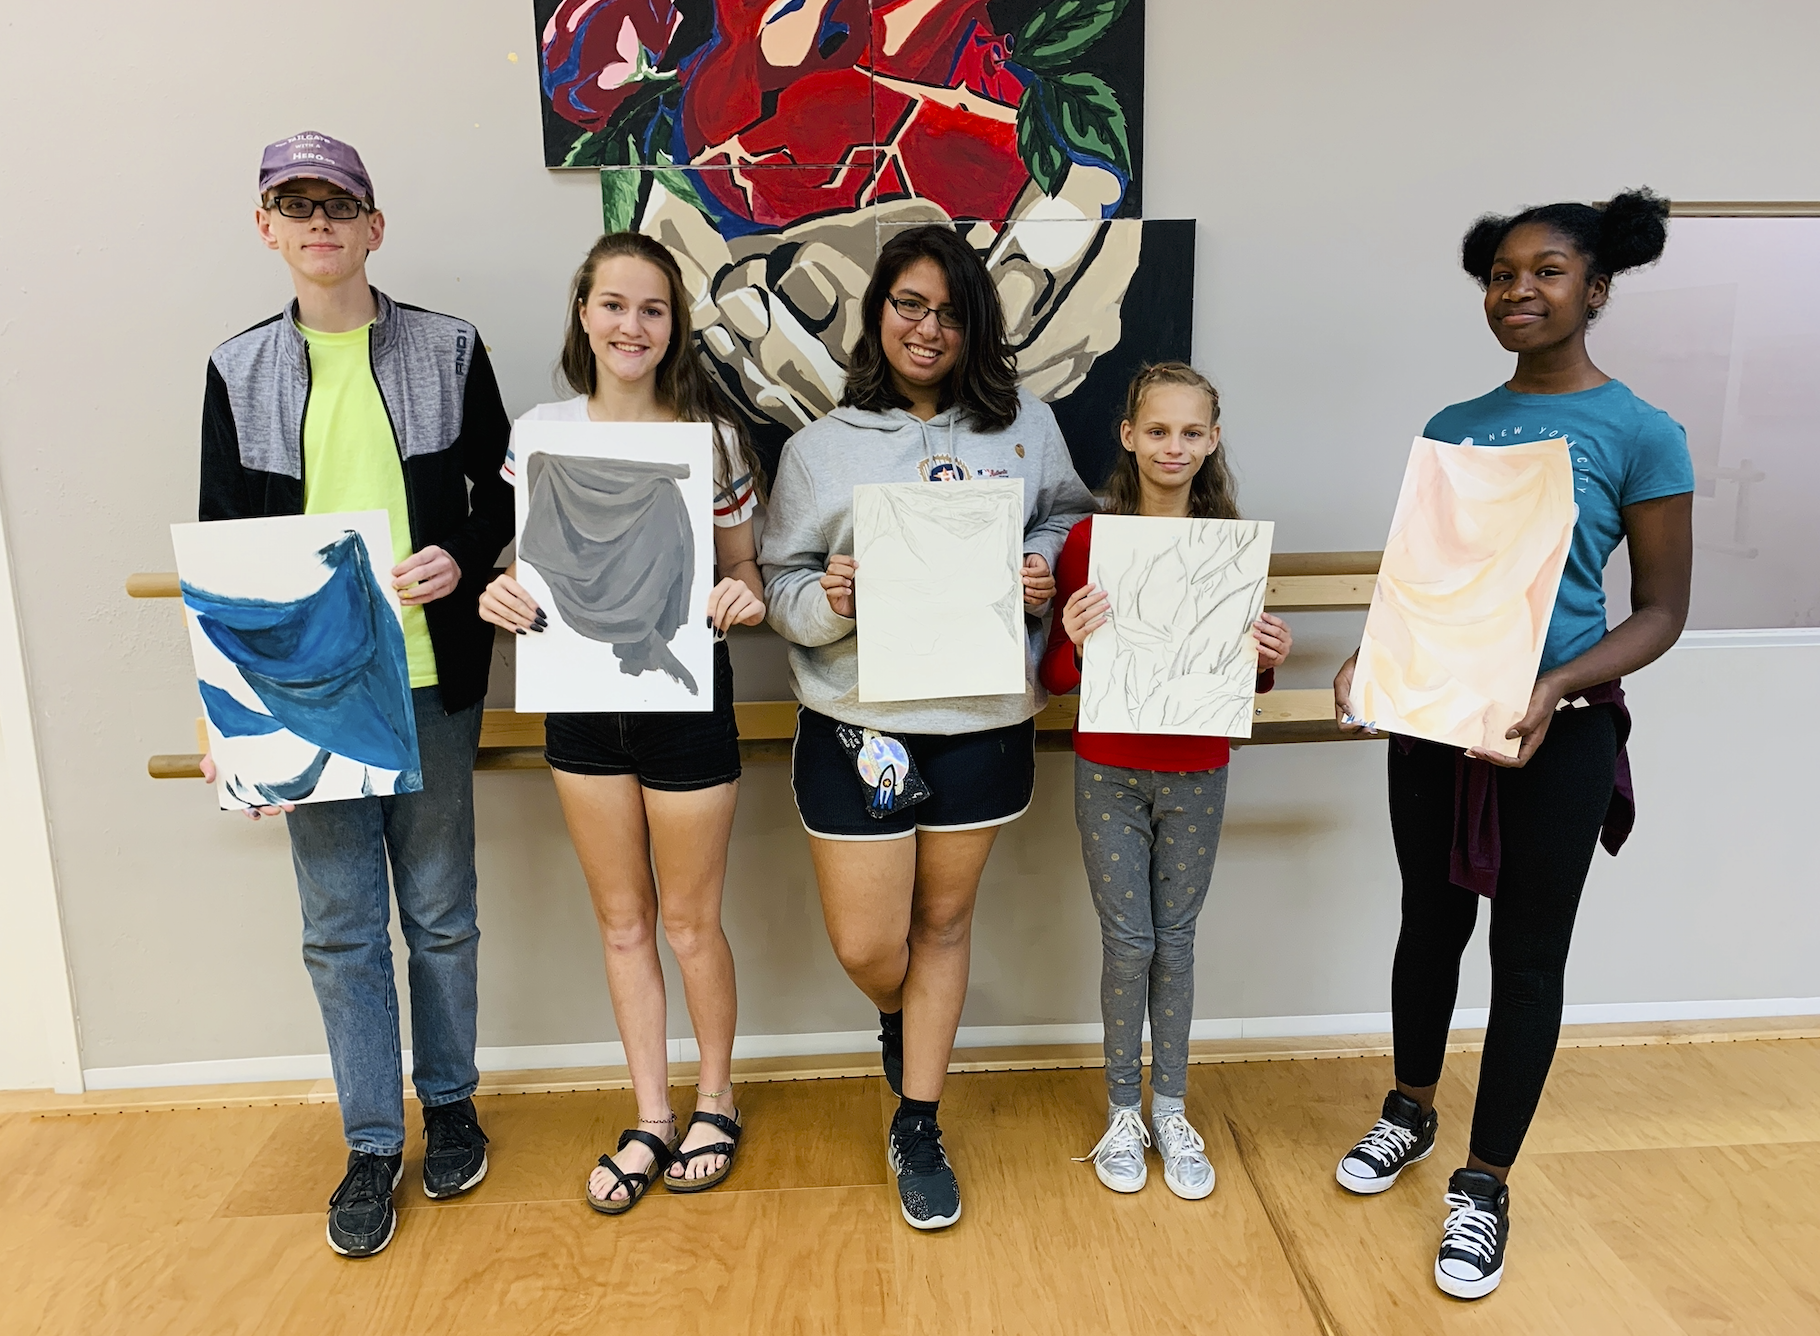 3 Day Art Camp – Florals & Gardens Watercolor Painting (Ages 10+)